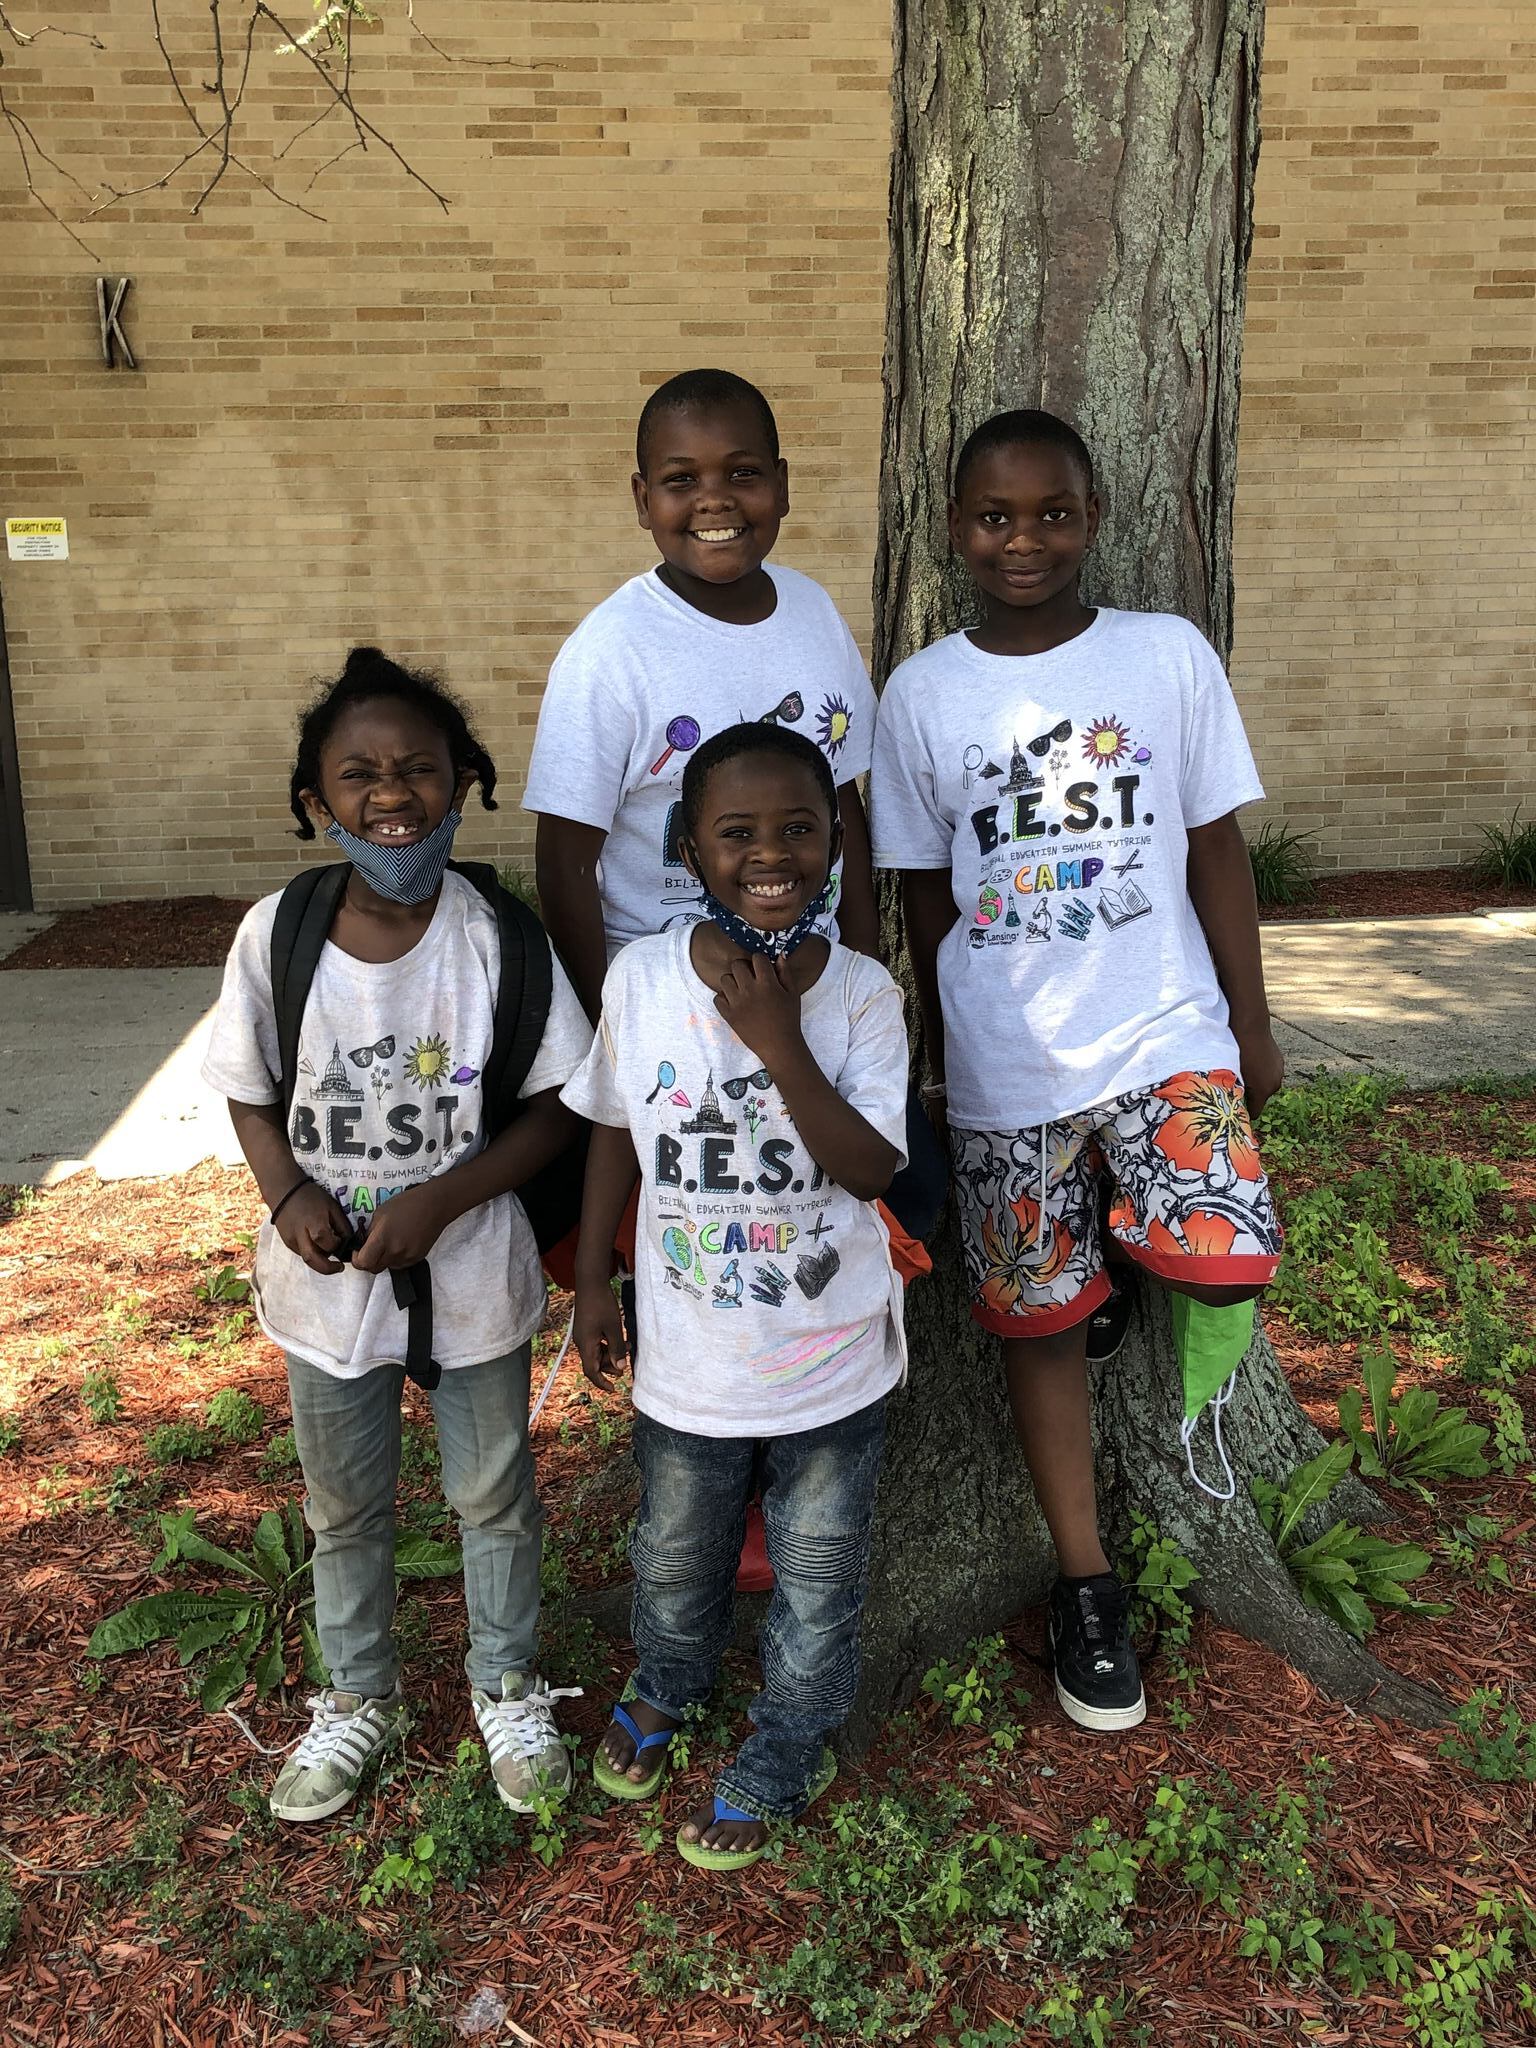 Four students standing under a tree smiling and wearing BEST Camp shirts